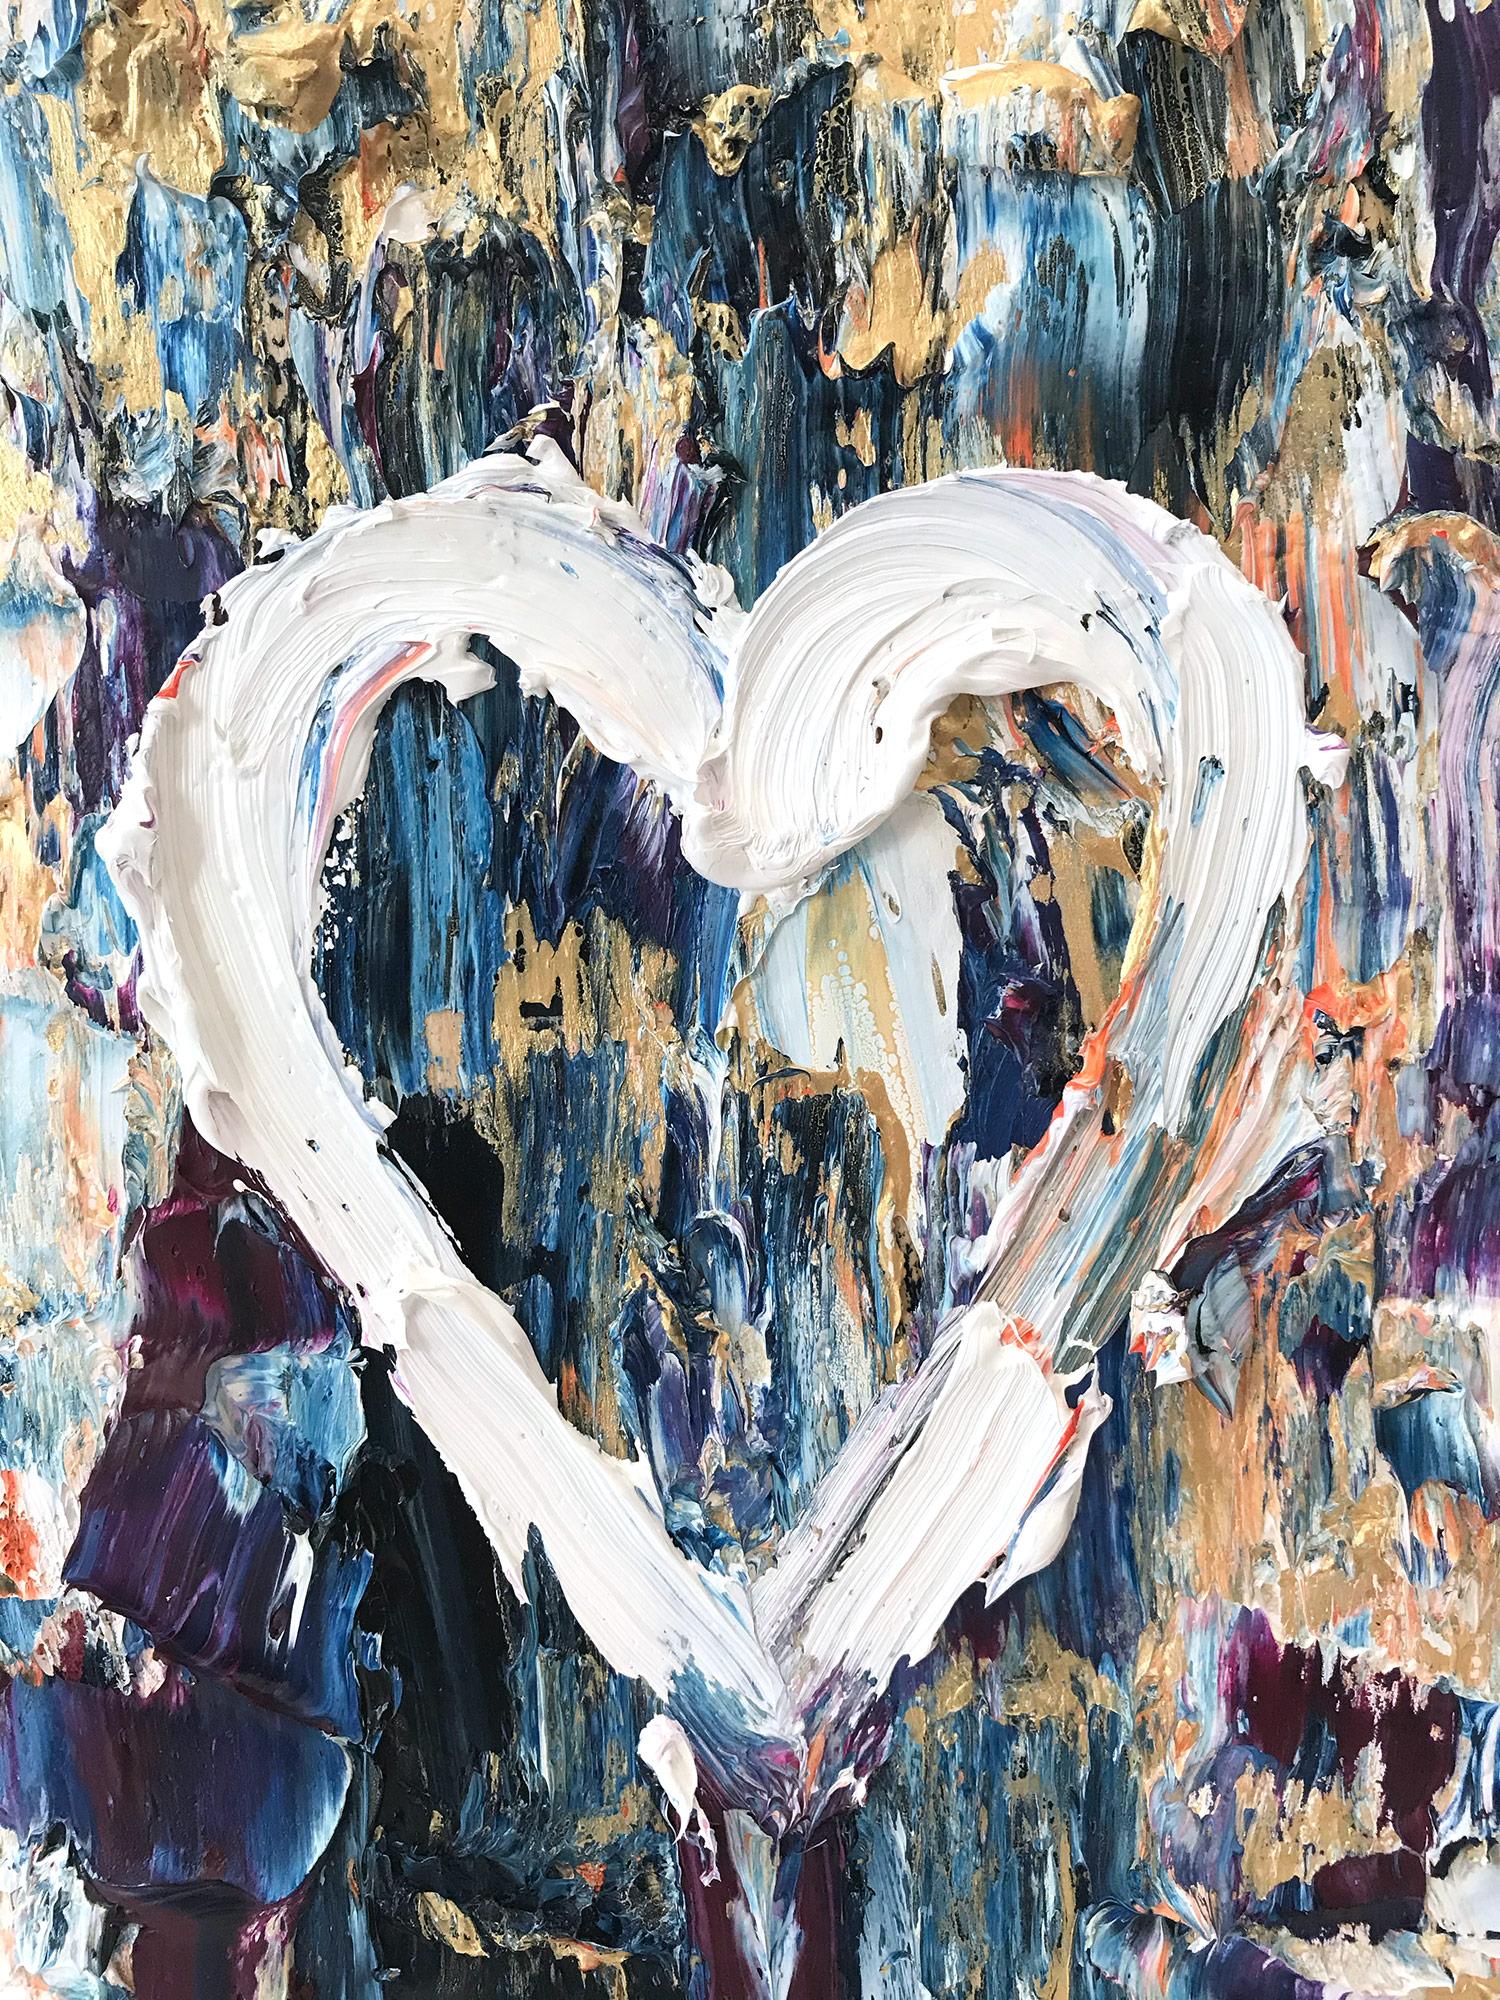 Motivated by bold color and fast brushwork, we are moved by the simplicity and thick textured oil paints in these works. Shaoul’s “My Heart Collection” is a vibrant and energetic display of love encapsulated in these miniature hearts, leaving us